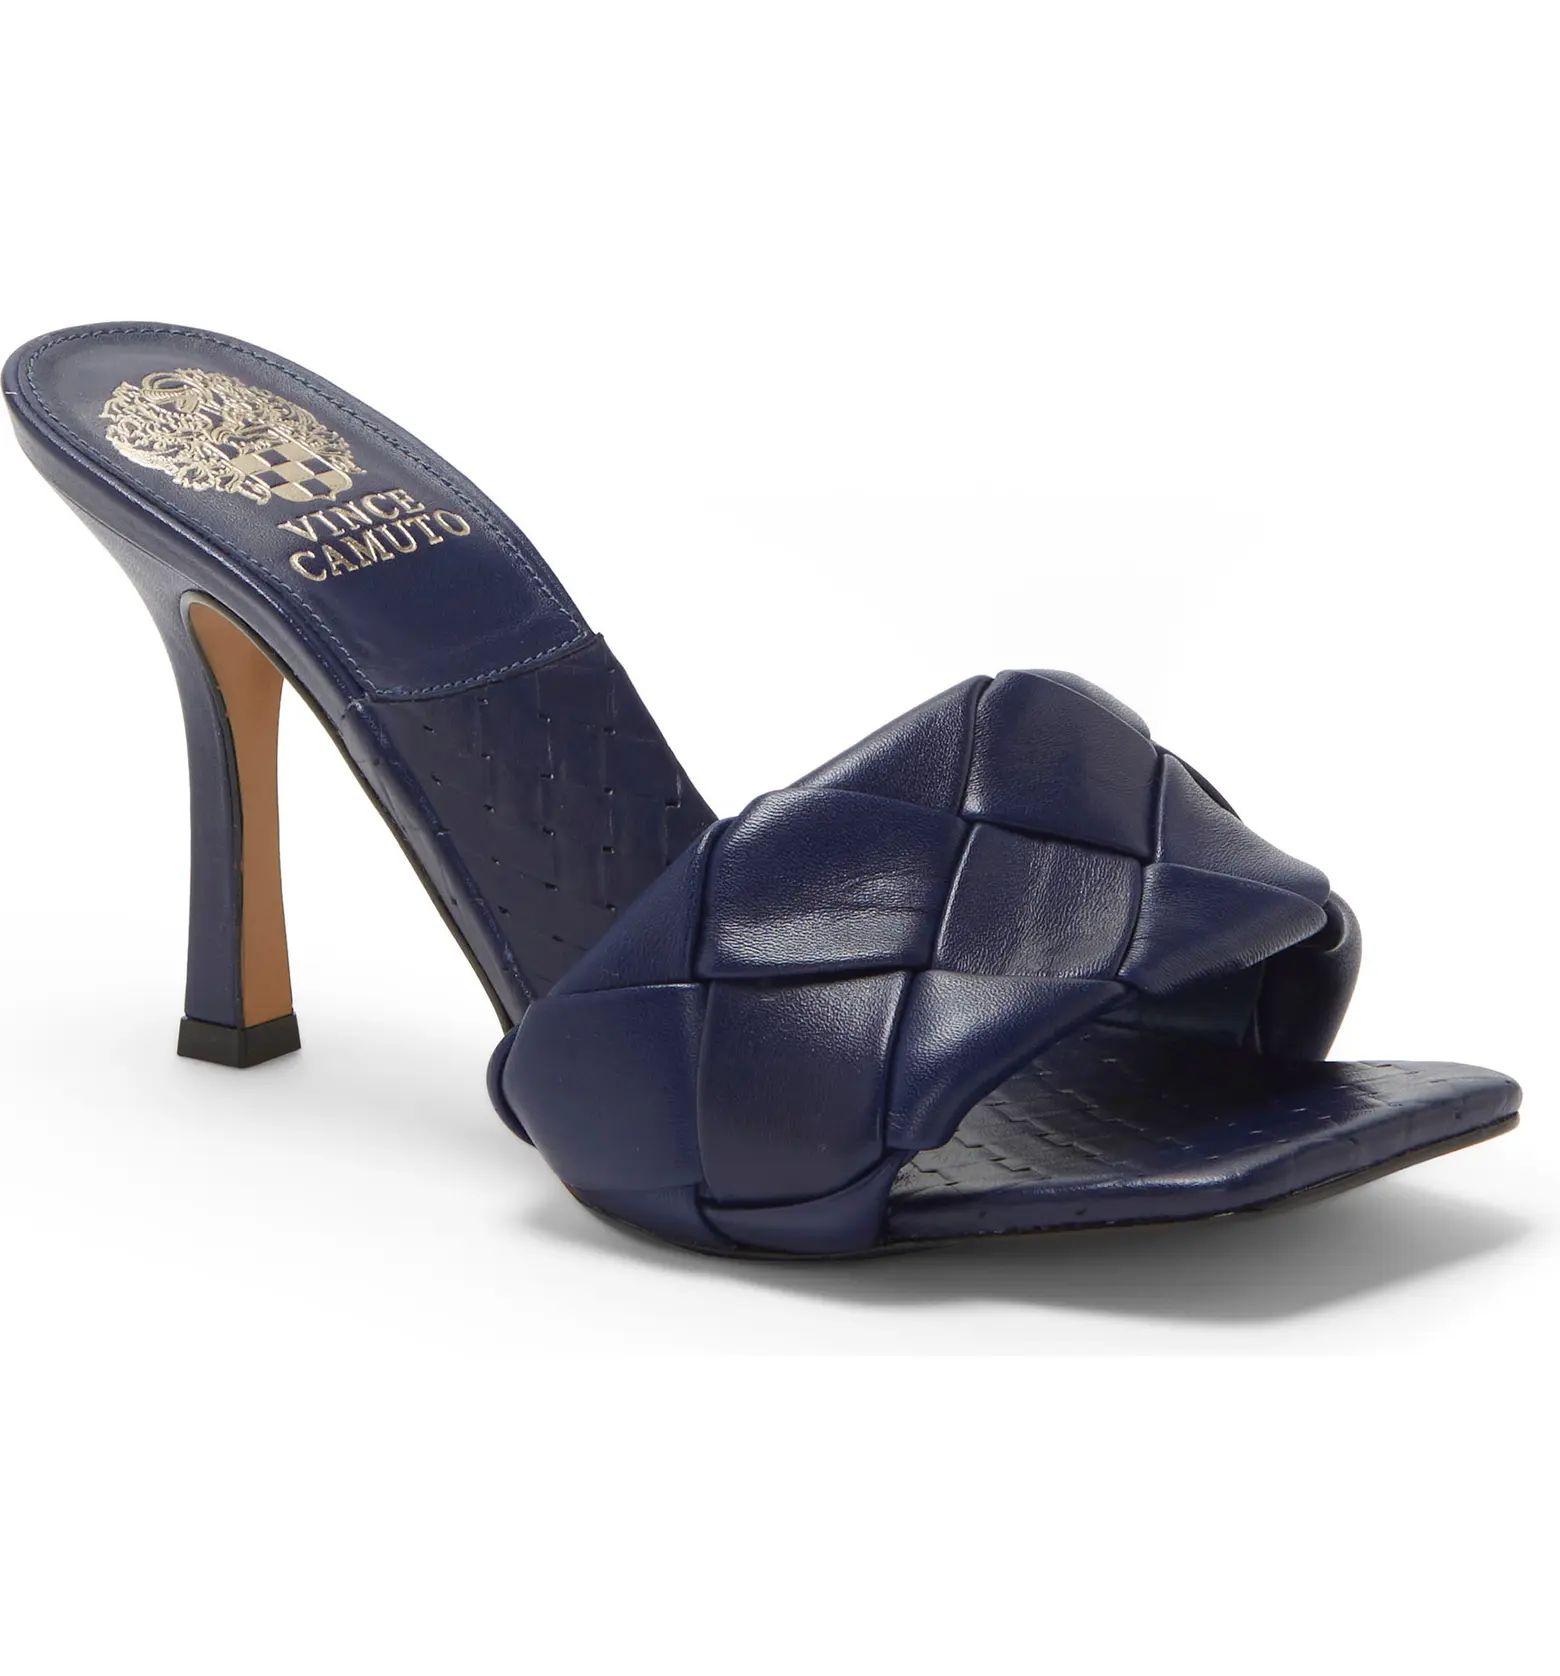 VINCE CAMUTO | Nordstrom